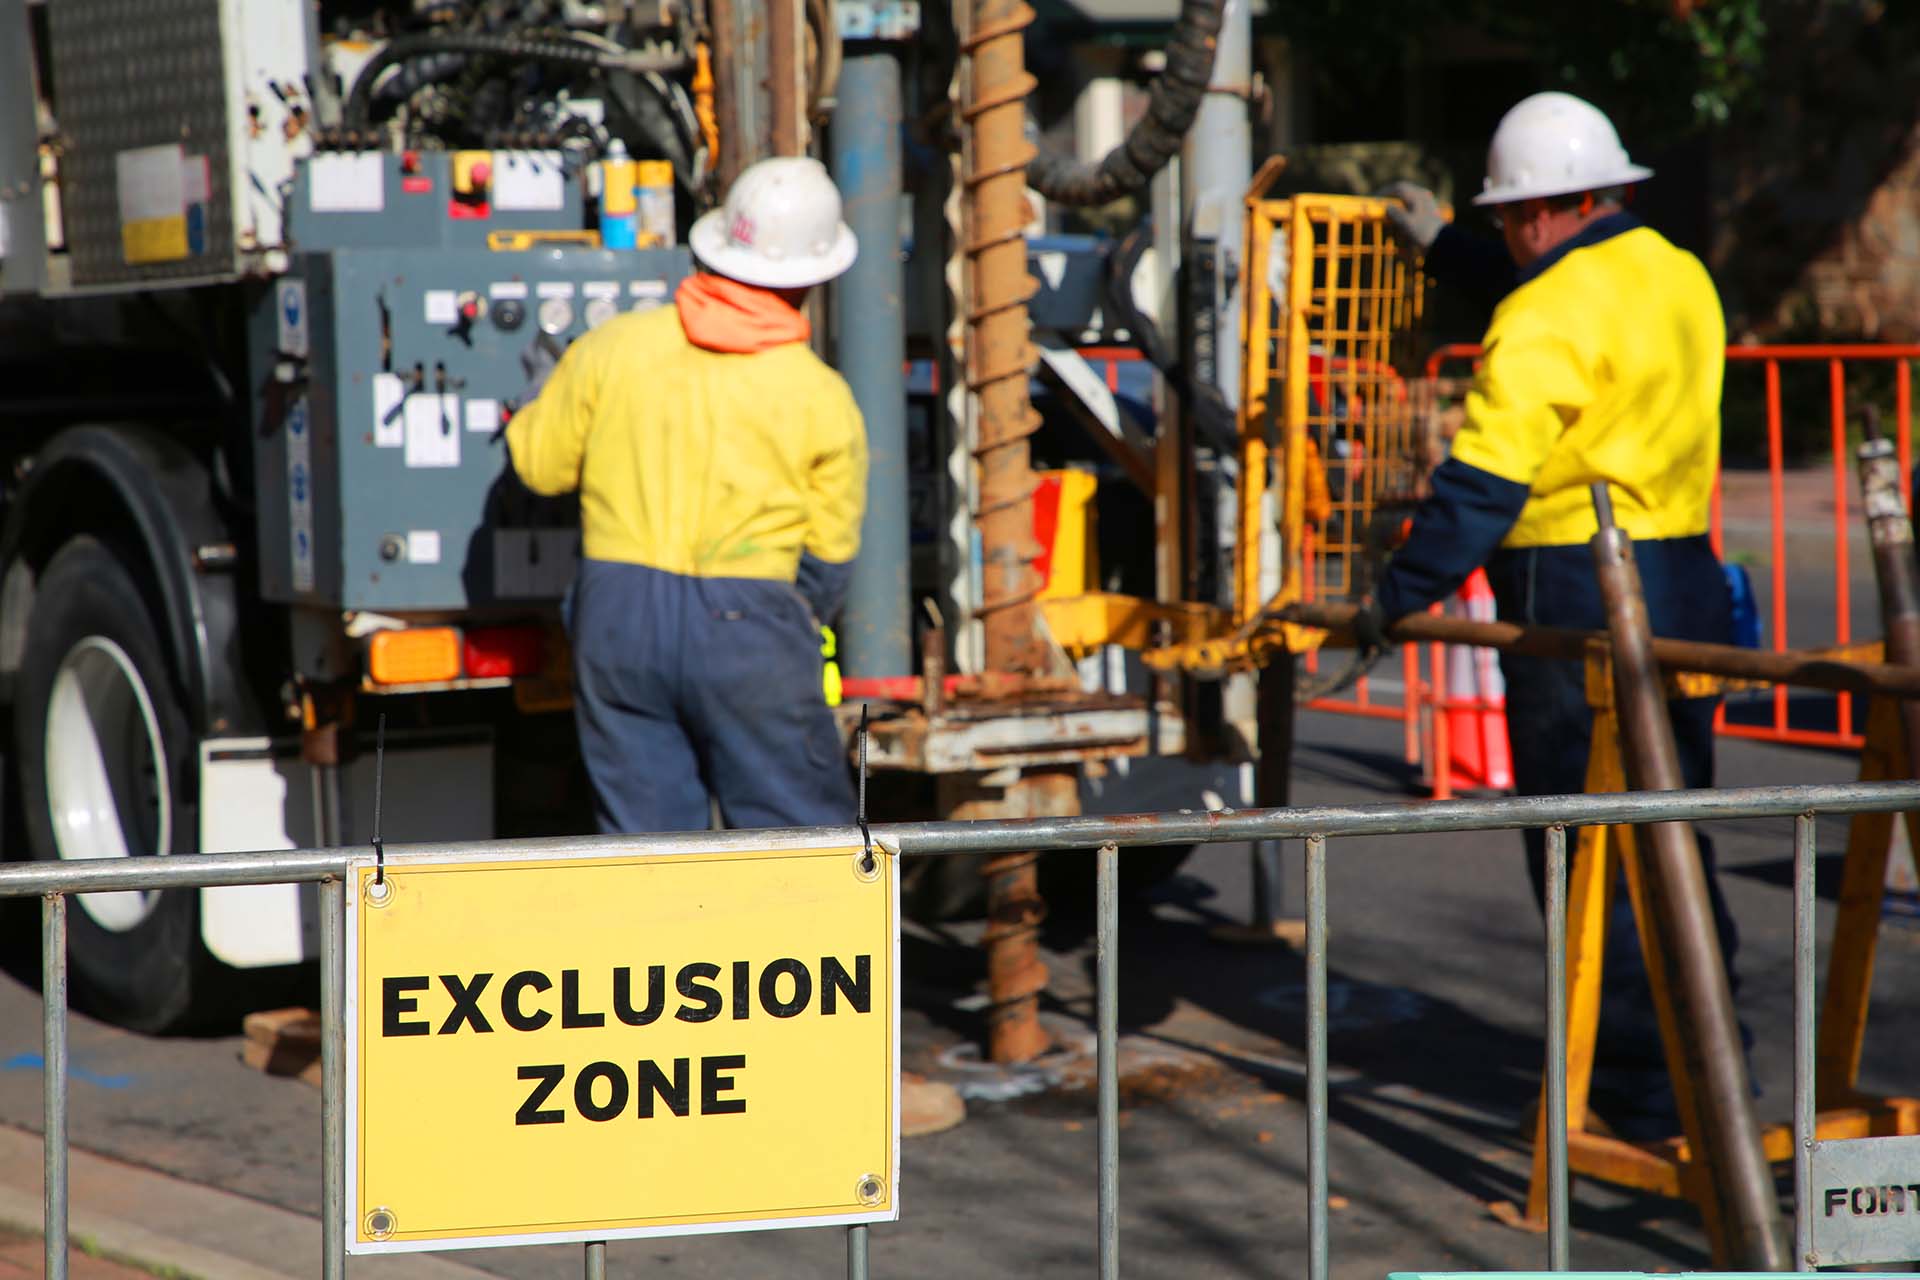 Exclusion zone as workers collect soil core samples